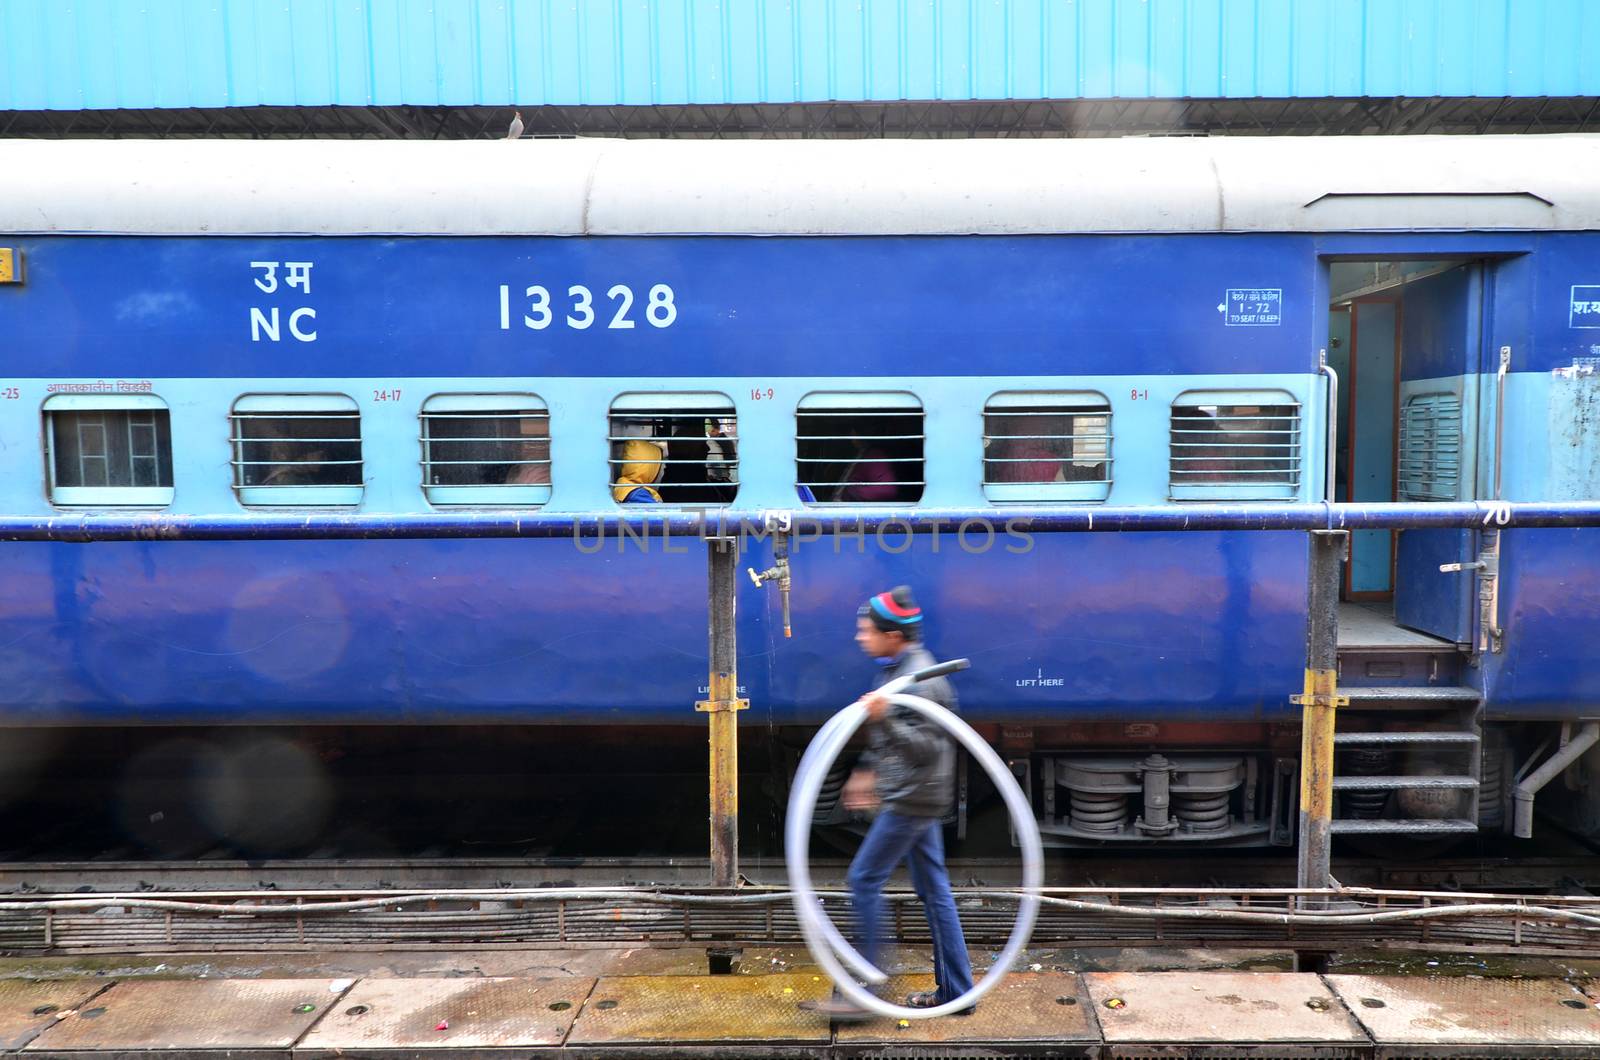 Jaipur, India - January 3, 2015: passengers at the window of a Indian Railway train at the railway station of Jaipur, Rajasthan, India. Indian Railways carries about 7,500 million passengers annually.